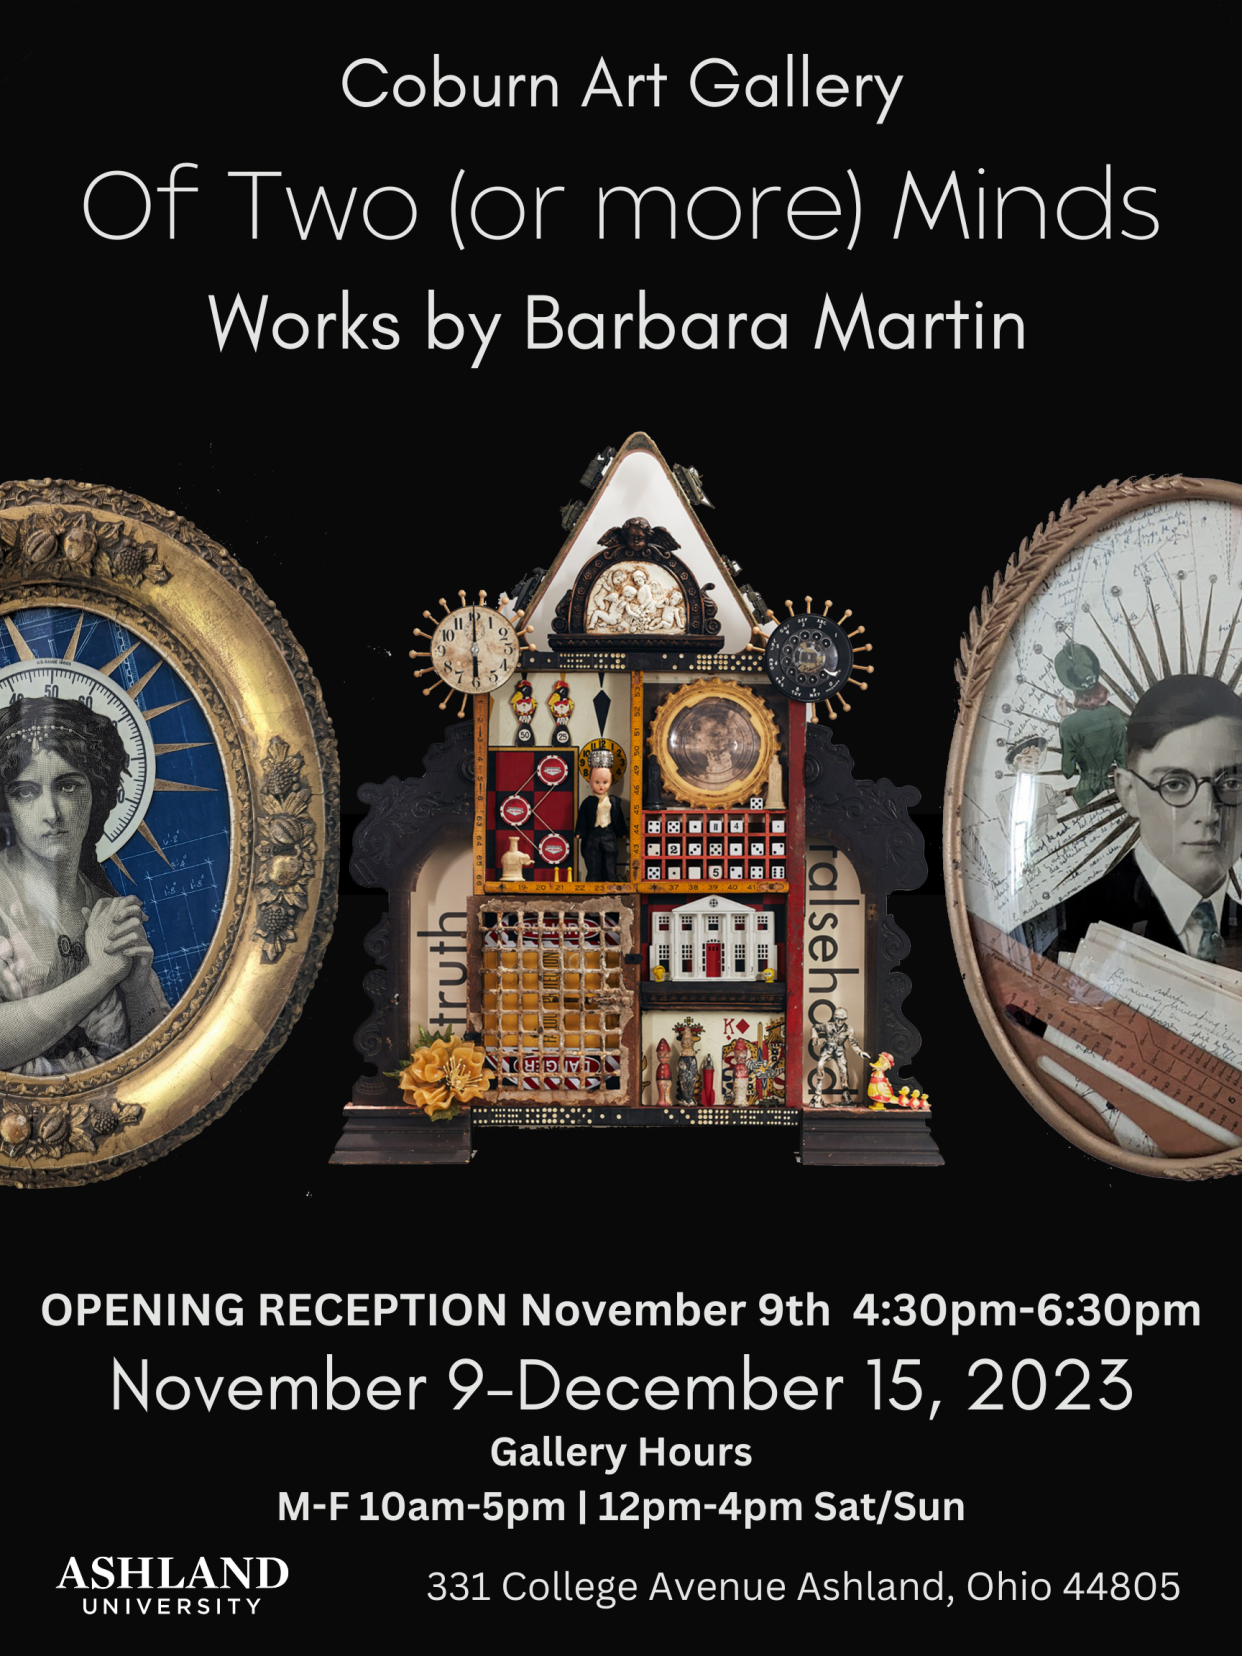 The Coburn Gallery and Ashland University Department of Art + Design will be hosting “Of Two (or more) Minds,” a mixed media exhibition by Cleveland artist Barbara Martin, from Thursday, Nov. 9, through Friday, Dec. 15.